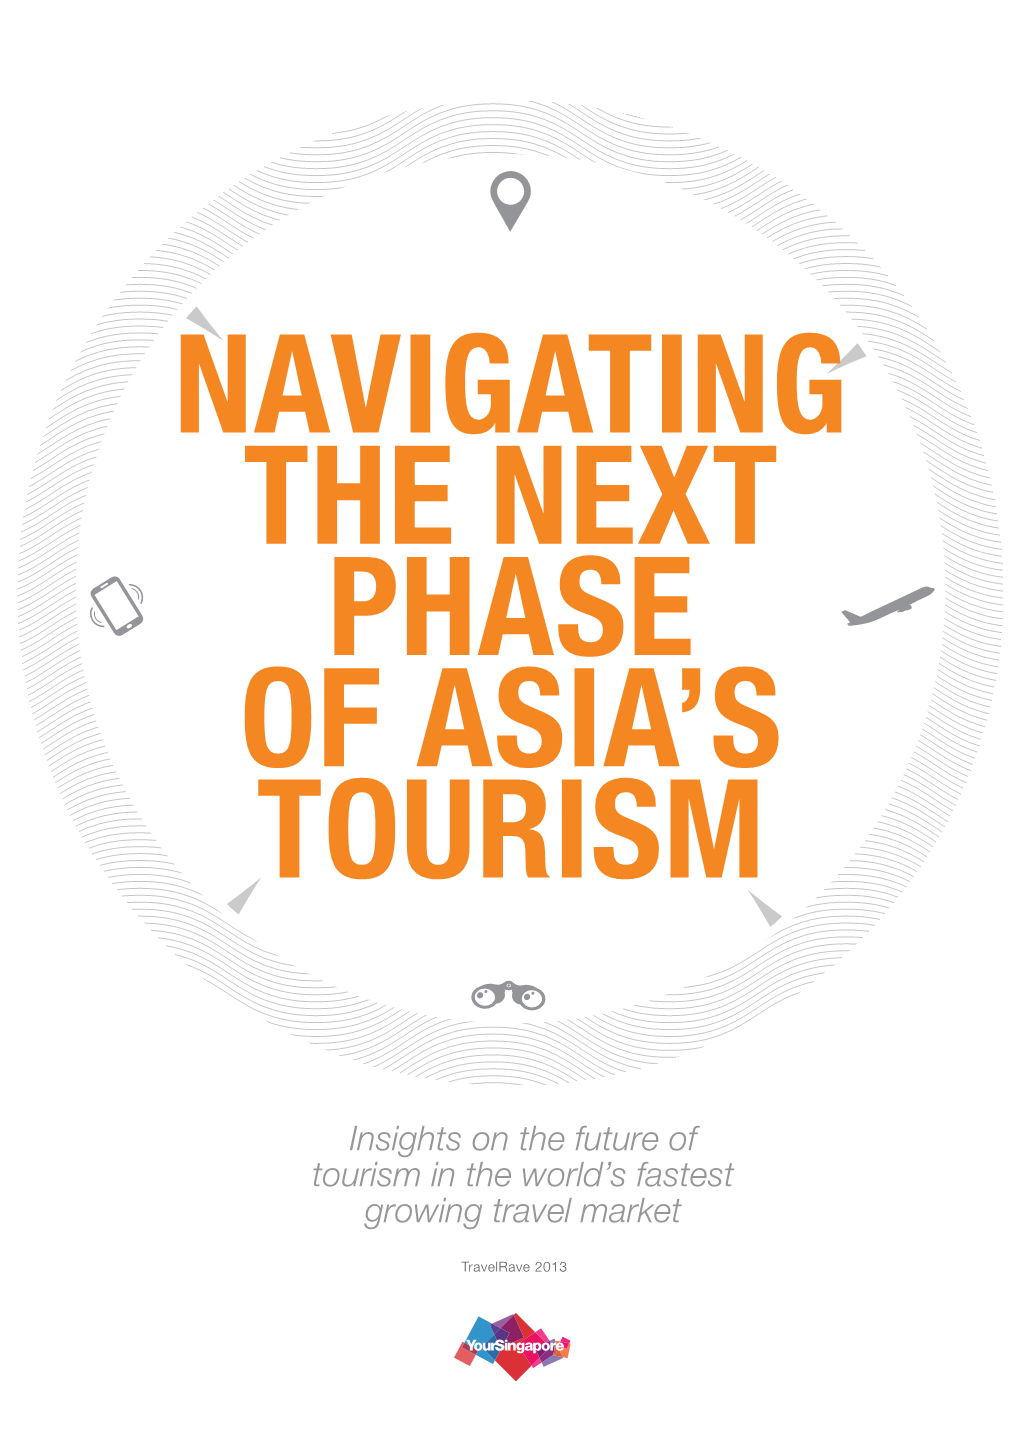 Insights on the Future of Tourism in the World's Fastest Growing Travel Market